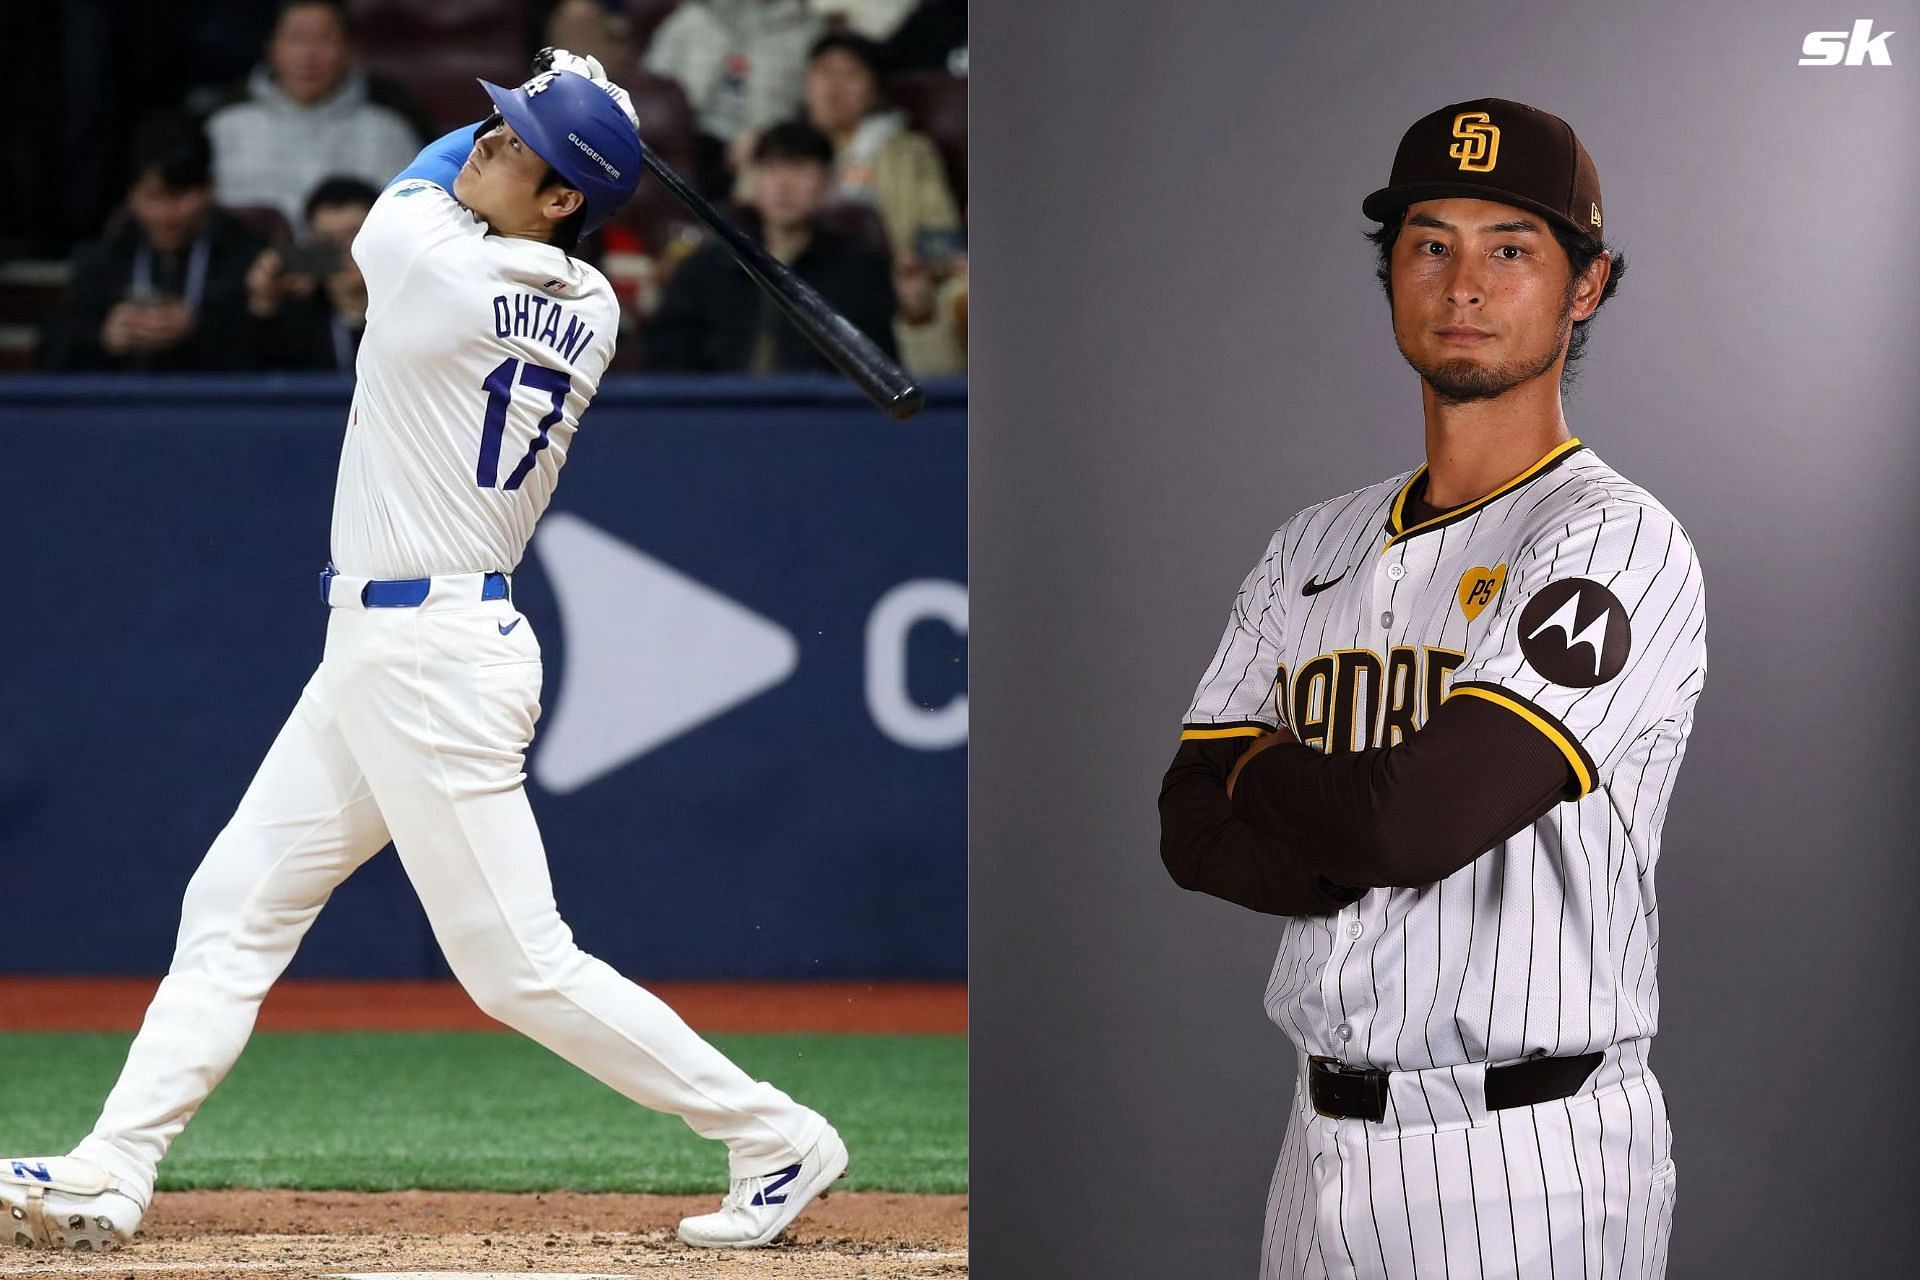 Dodgers fans excited for opening game and Shohei Ohtani